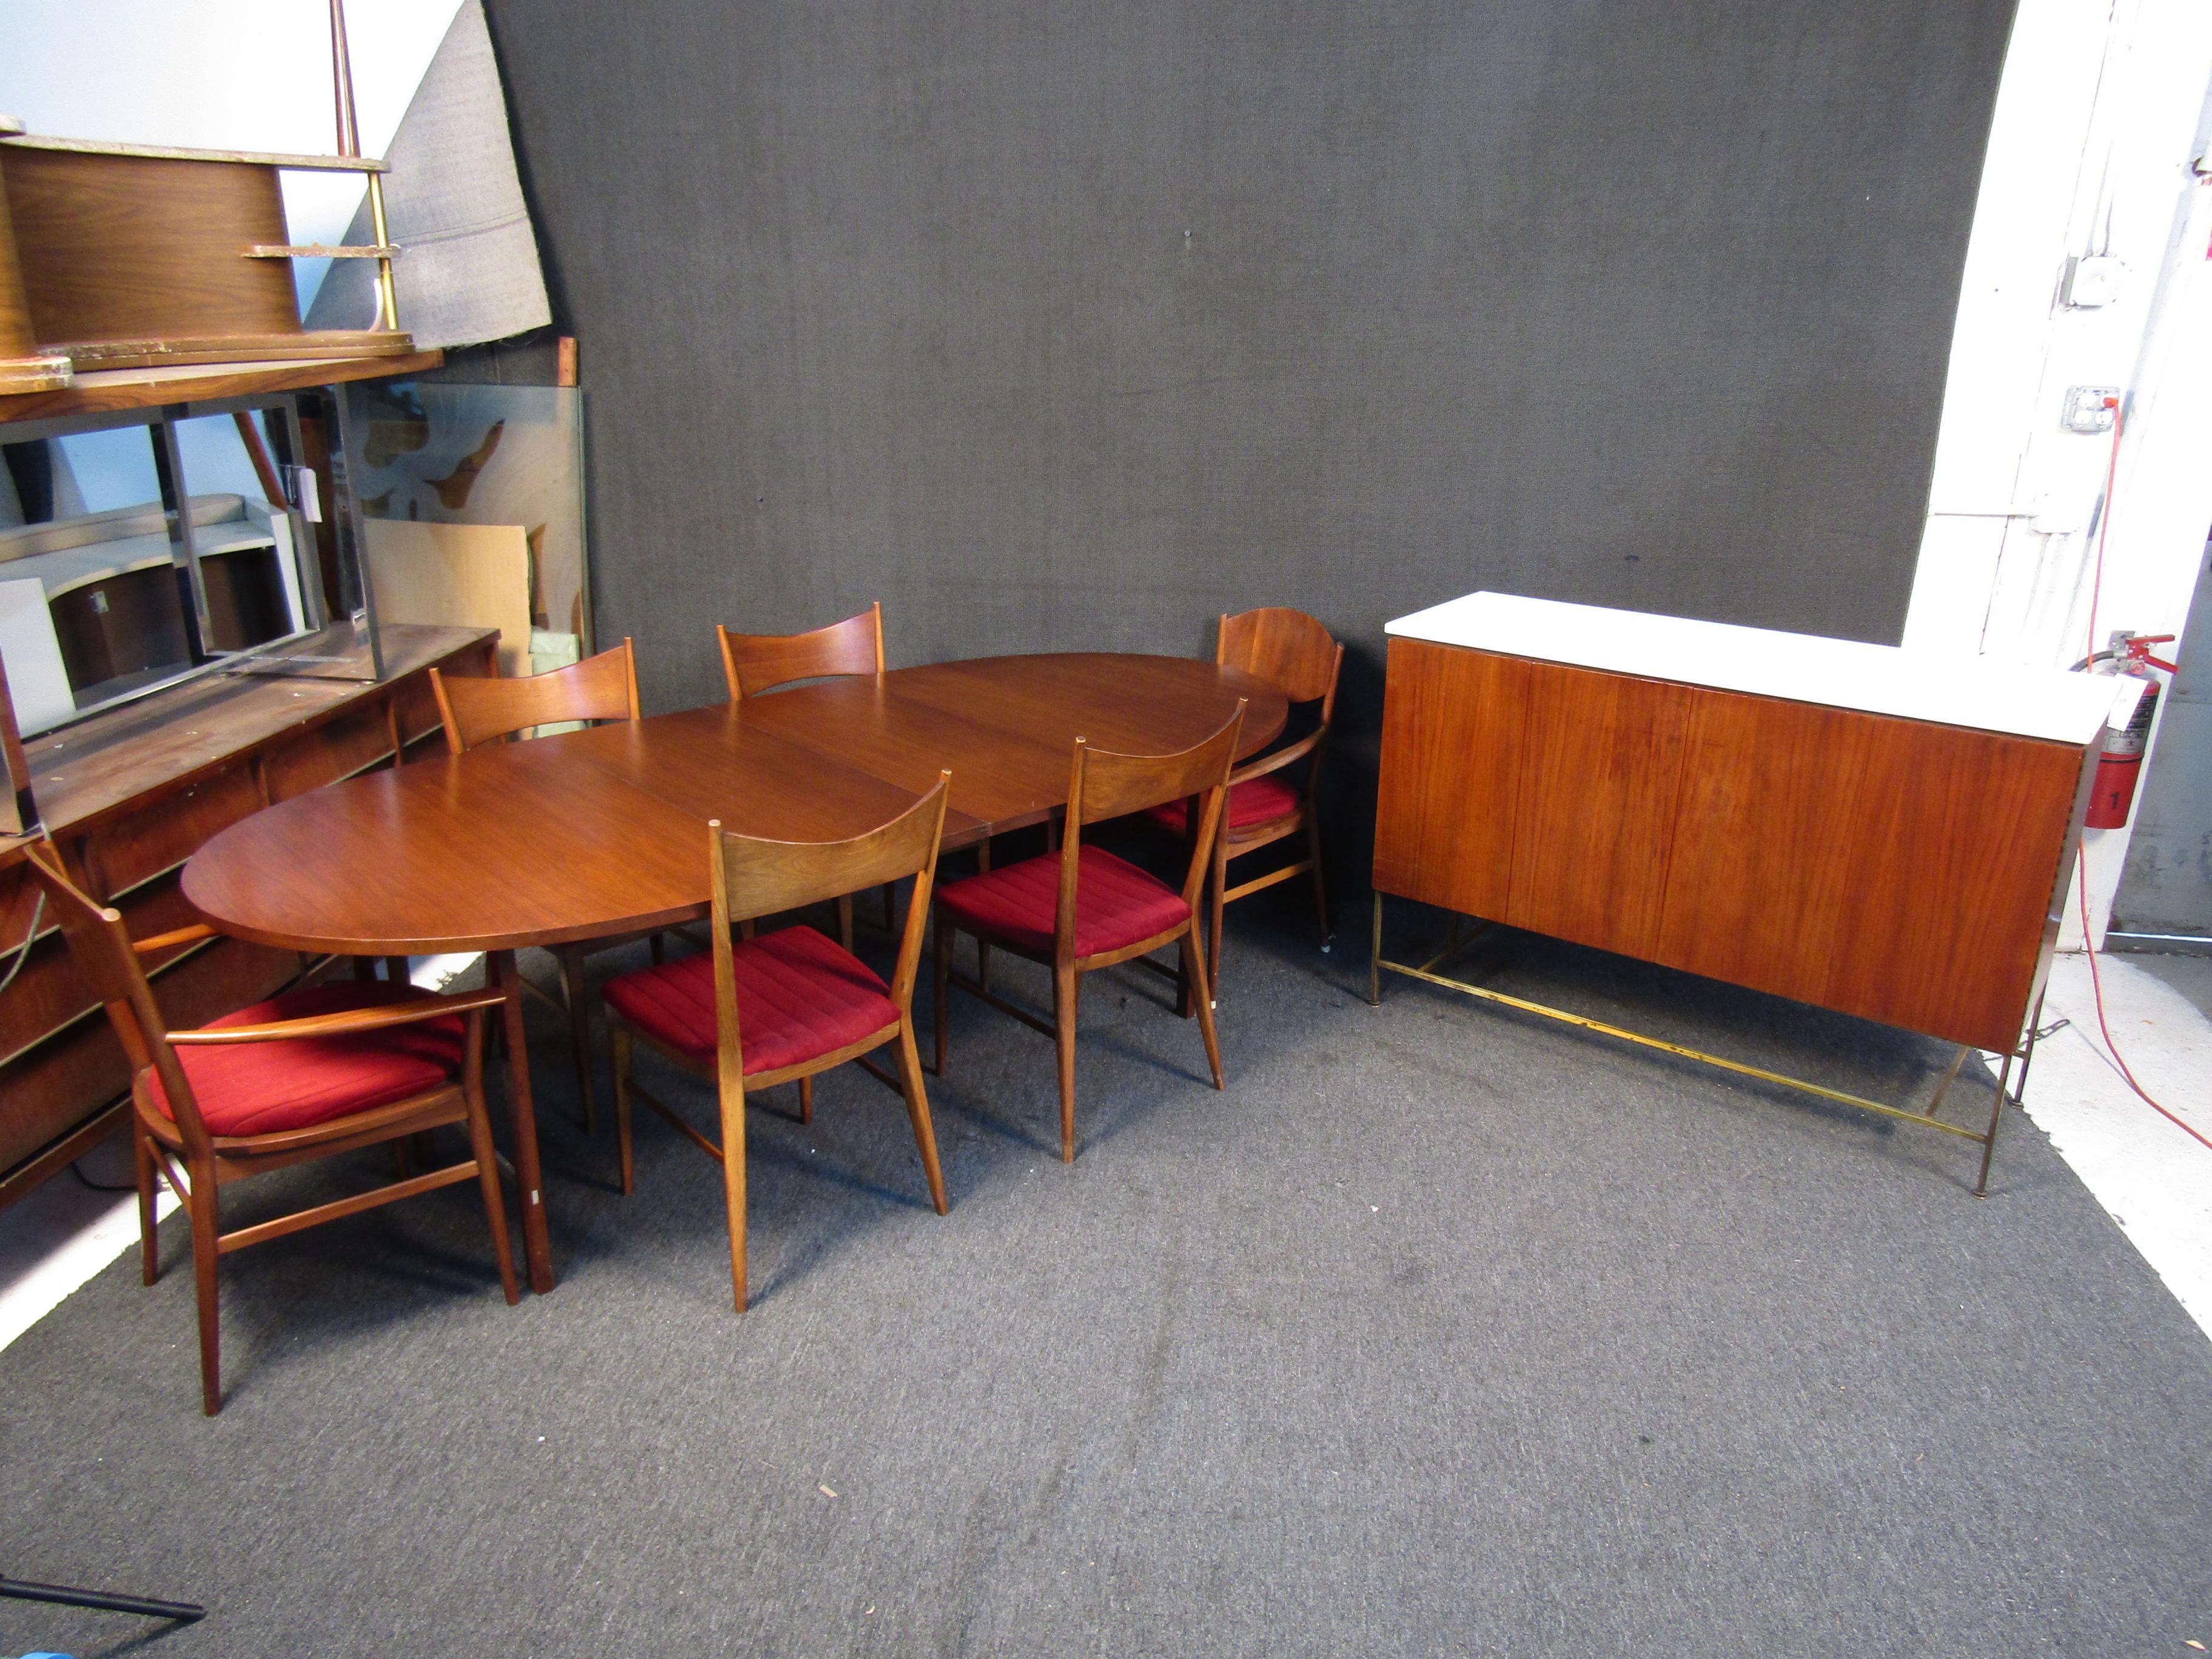 Add timeless Mid-Century Modern style to your dining room with this vintage set by Paul McCobb. It includes an expanding dining table, six chairs (2 with arms, 4 without), and a large server, all in rich walnut. Please confirm item location with